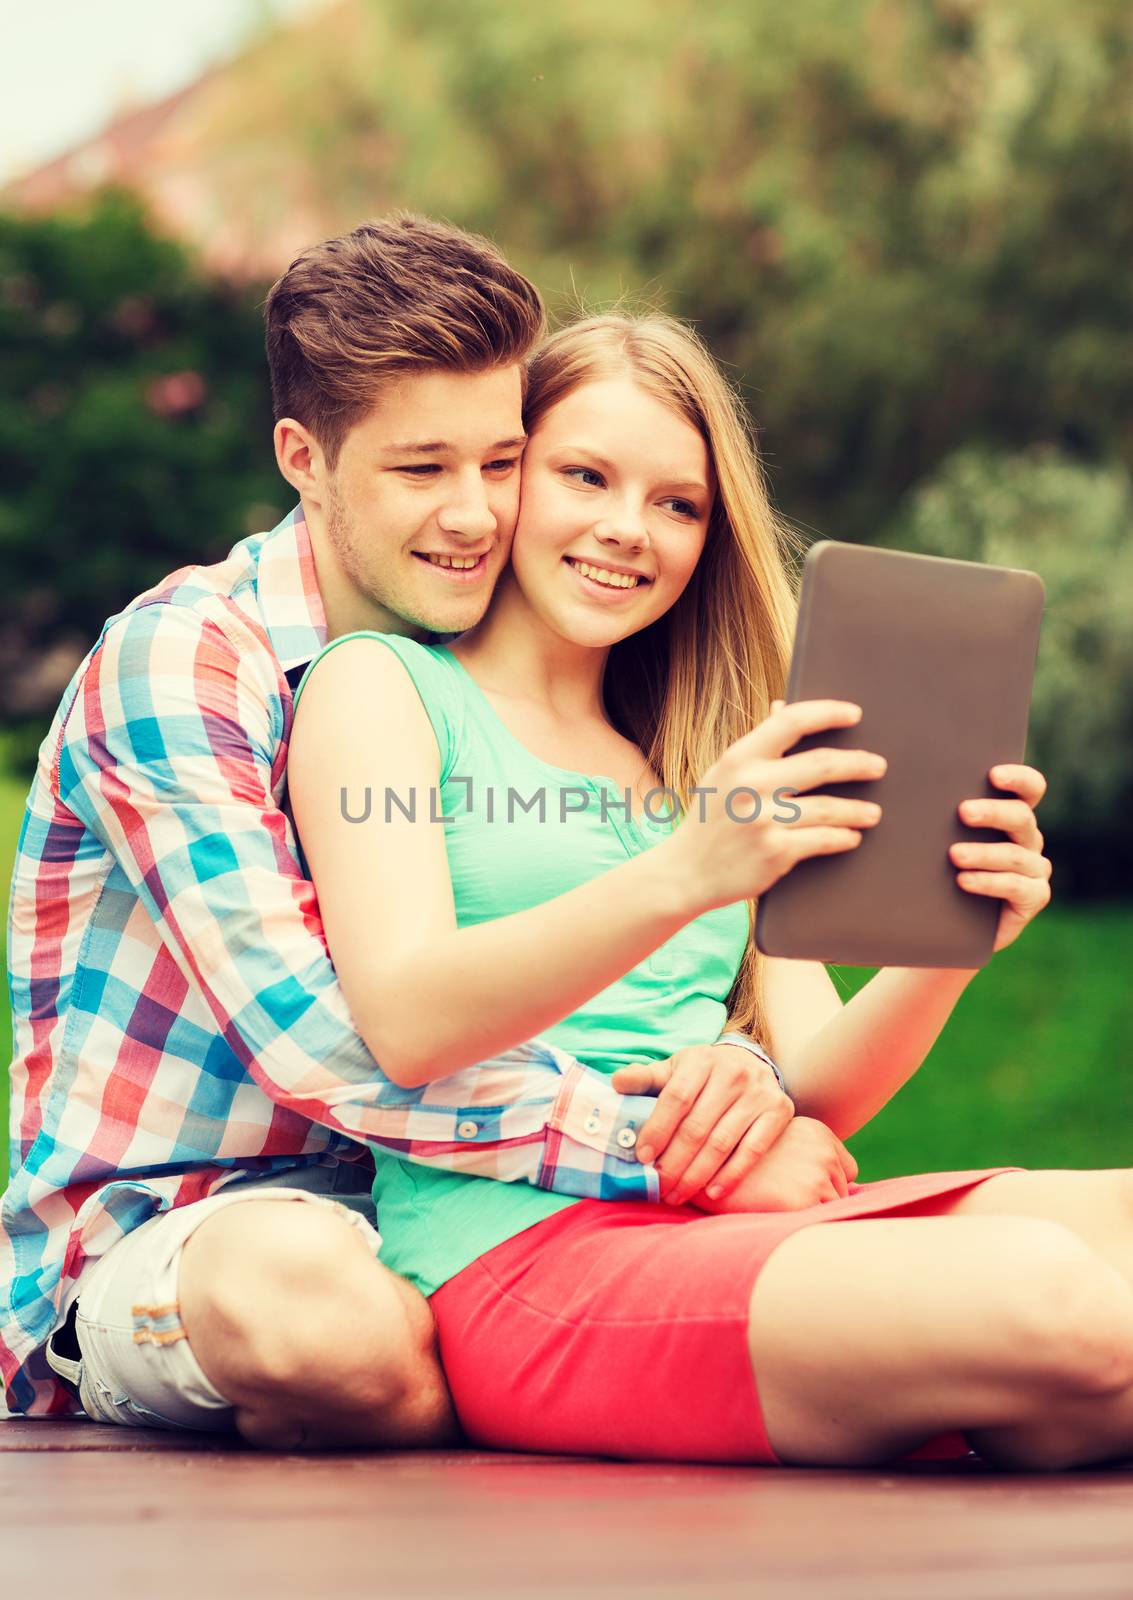 vacation, holidays, technology and friendship concept - smiling couple with tablet pc computer making selfie in park